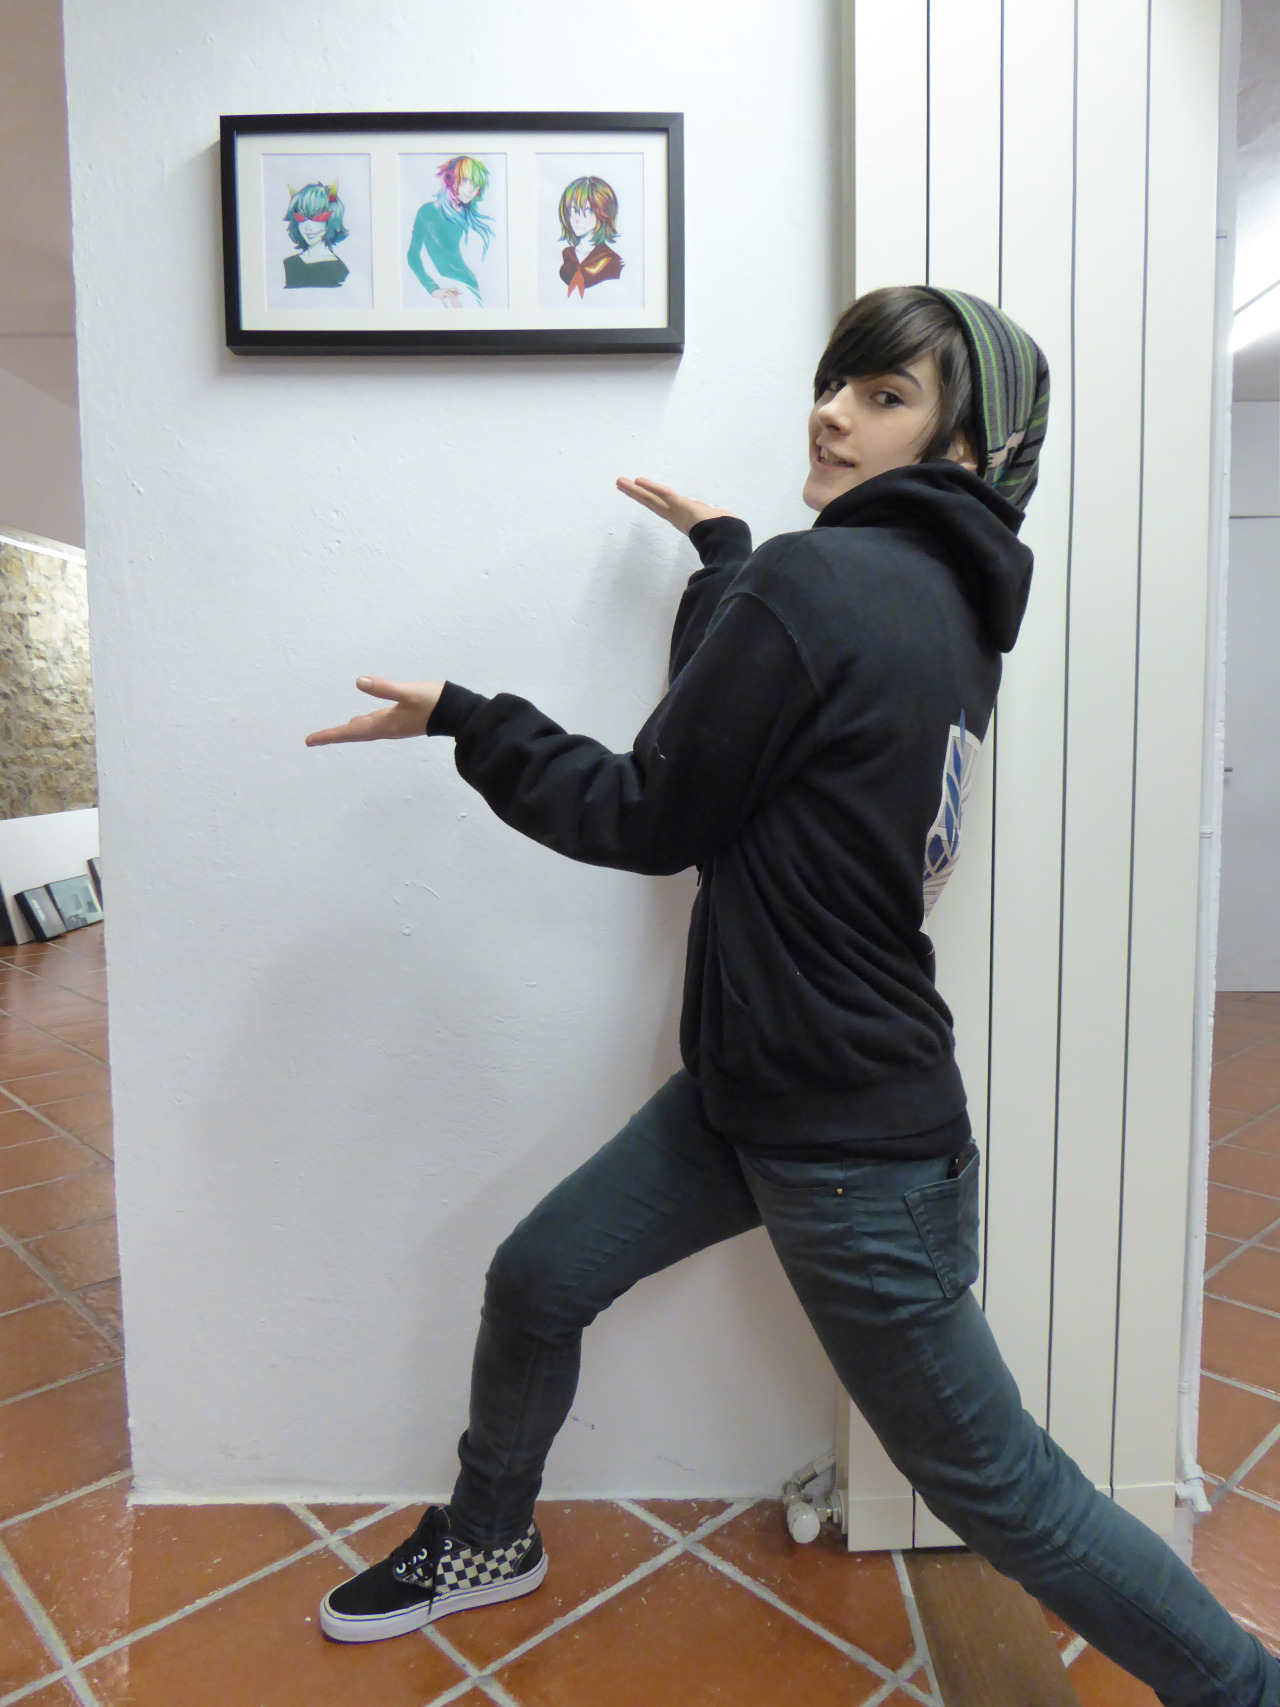 geheichous:  Never let Gehe show his artwork in an art exhibition or you will get